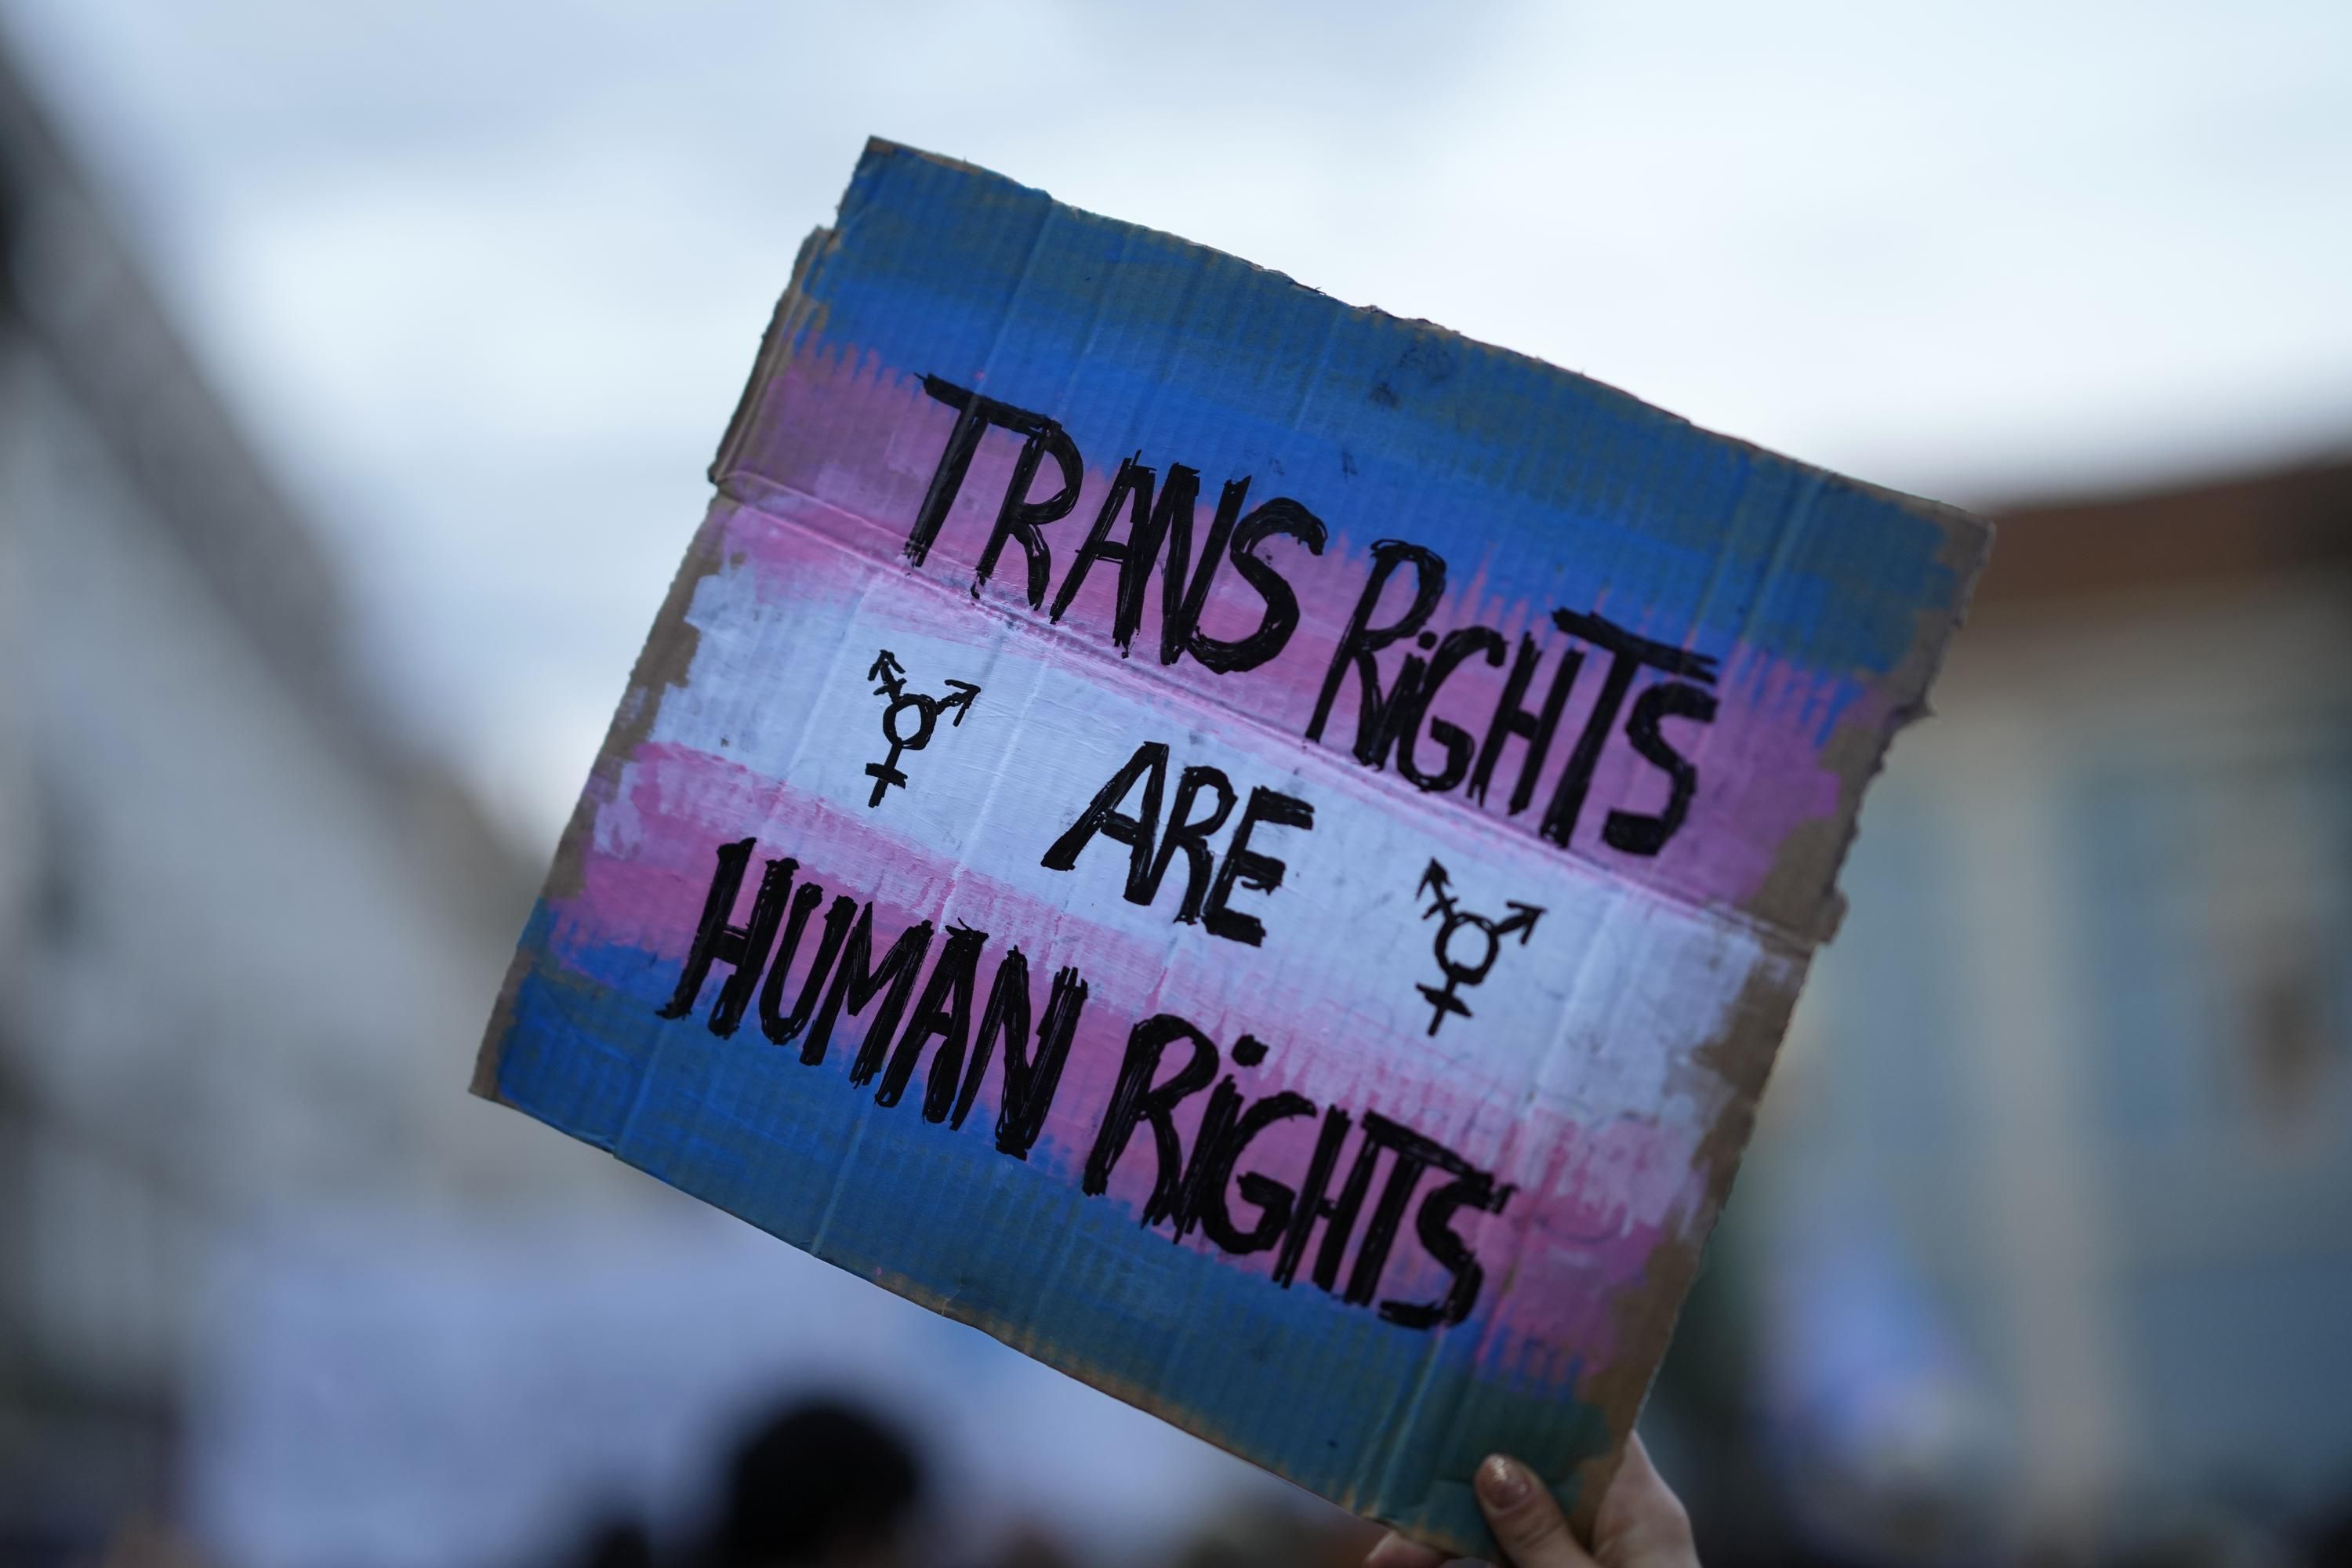 Transgender people of color account for 81% of known victims this year